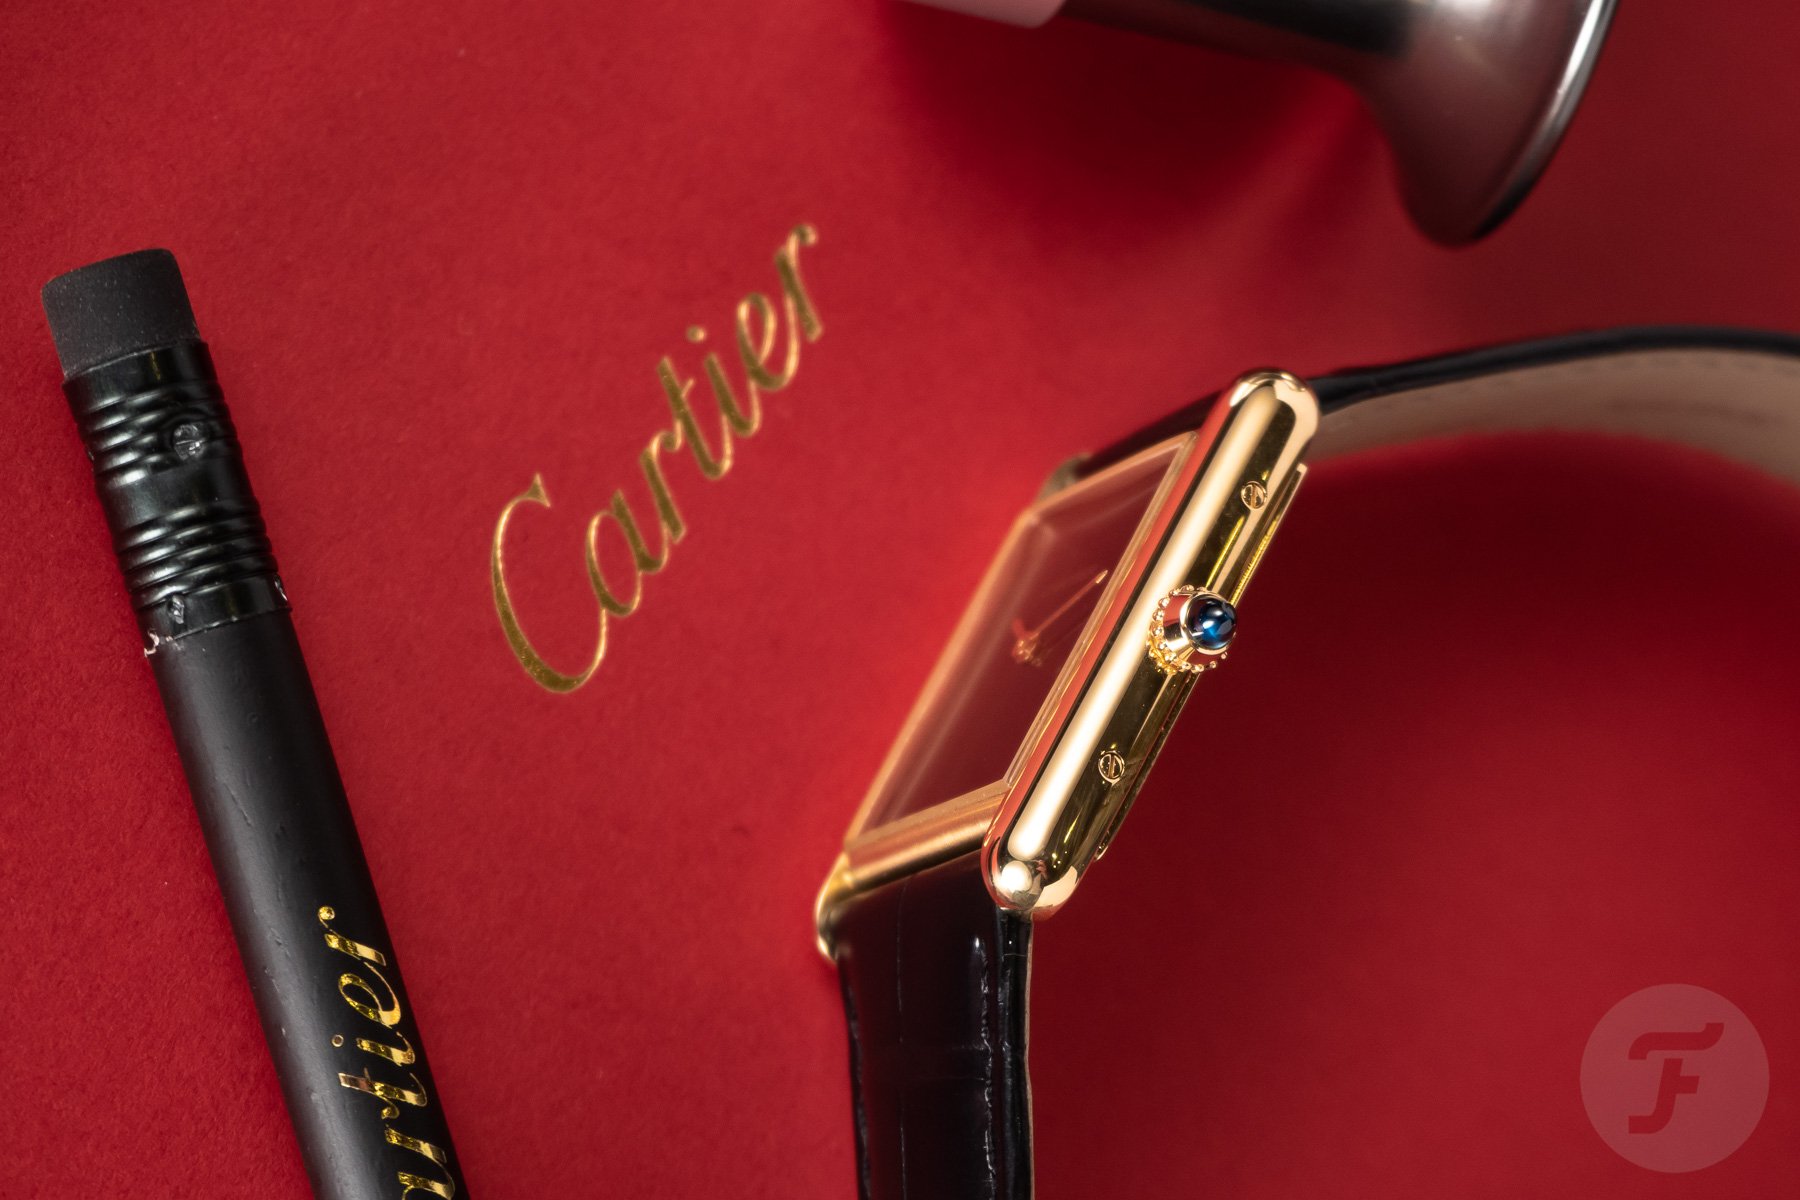 Cartier Louis Cartier Tank Watch Review - Oracle Time